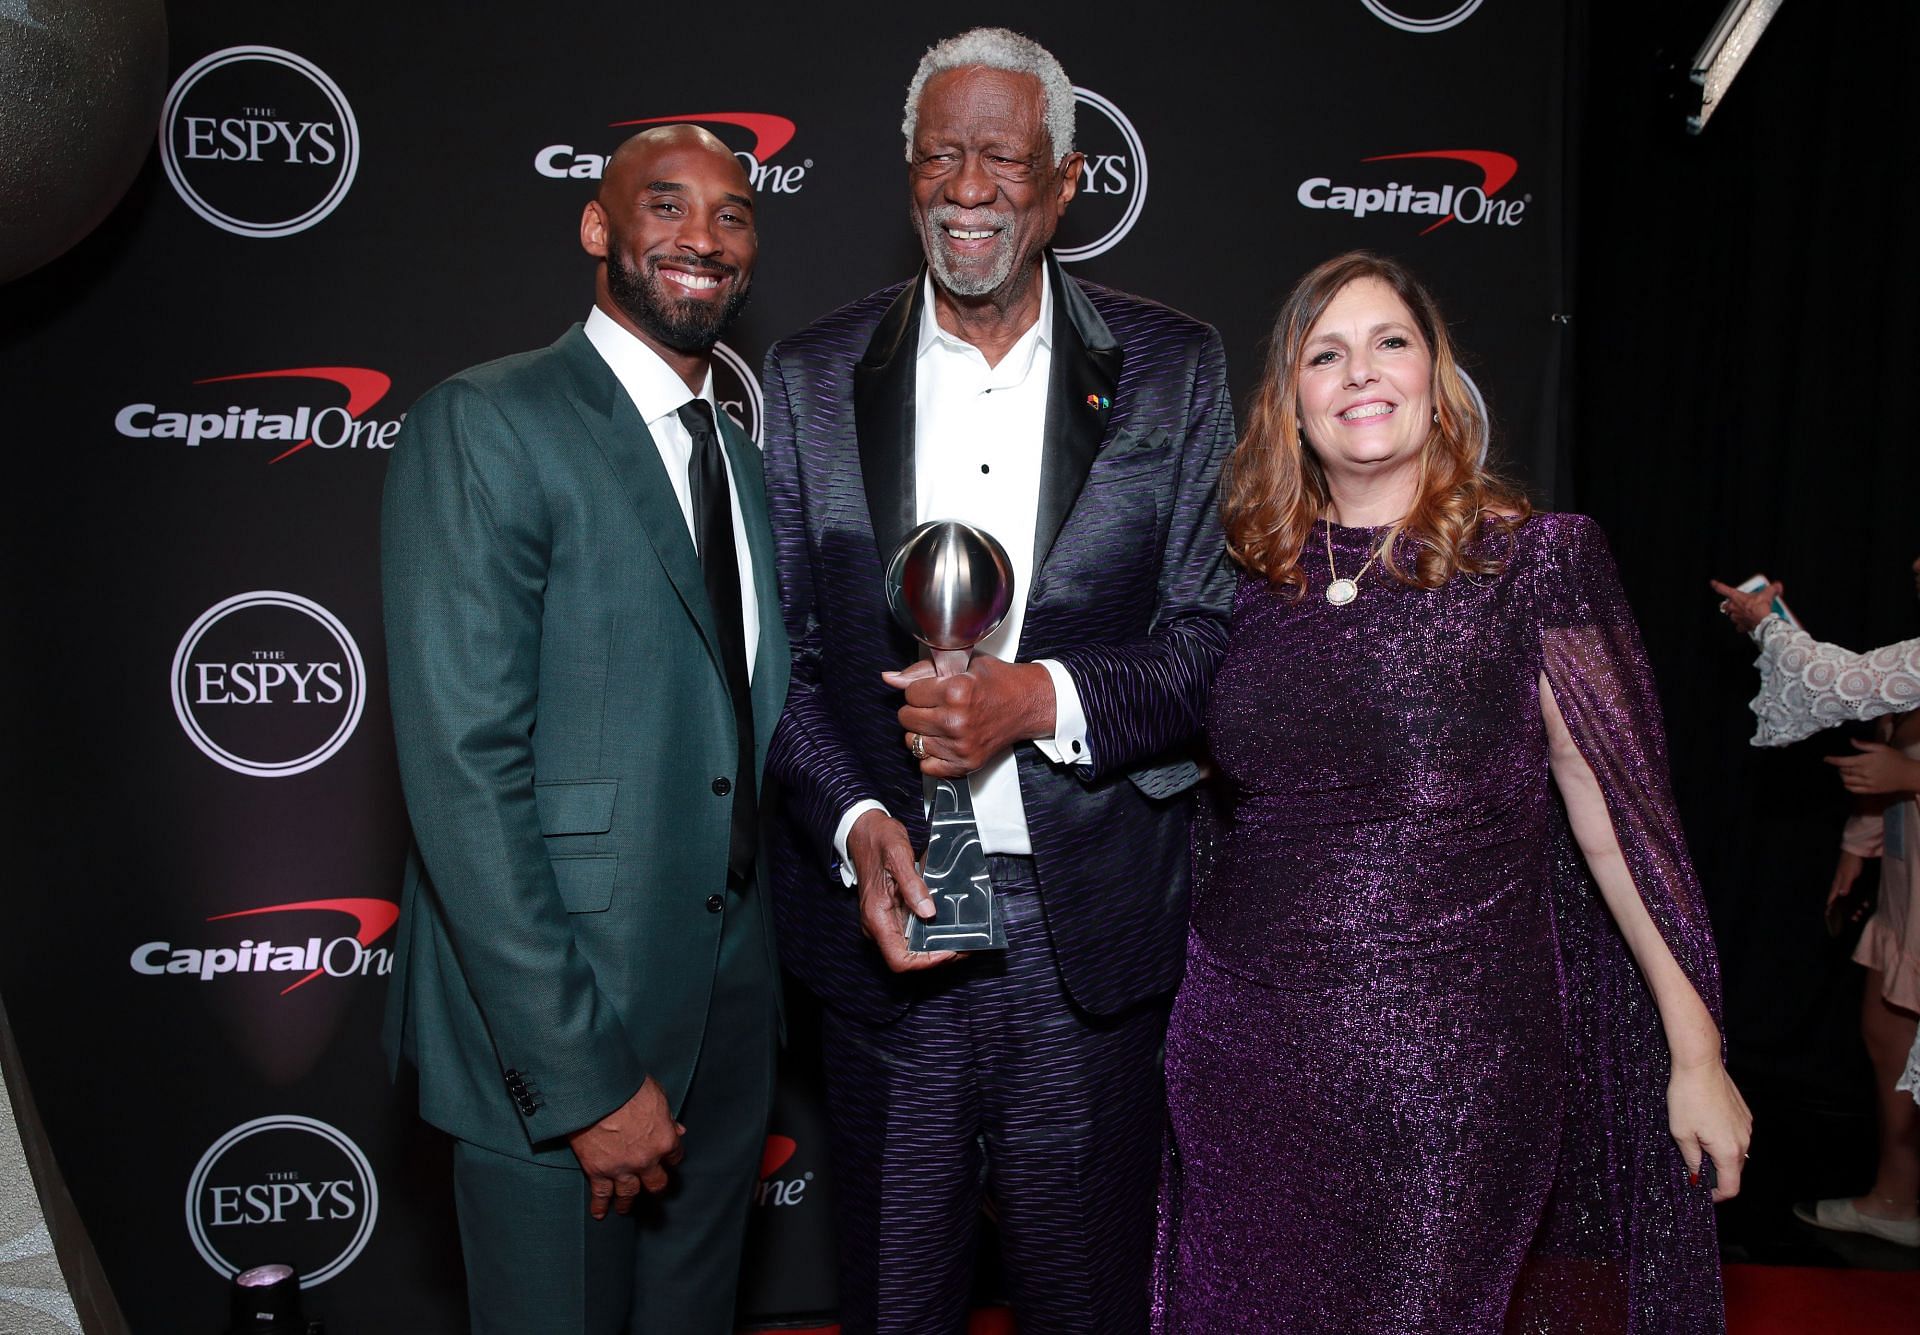 Bill Russell (middle) with his wife Jeannine Russell and Kobe Bryant at the ESPYS